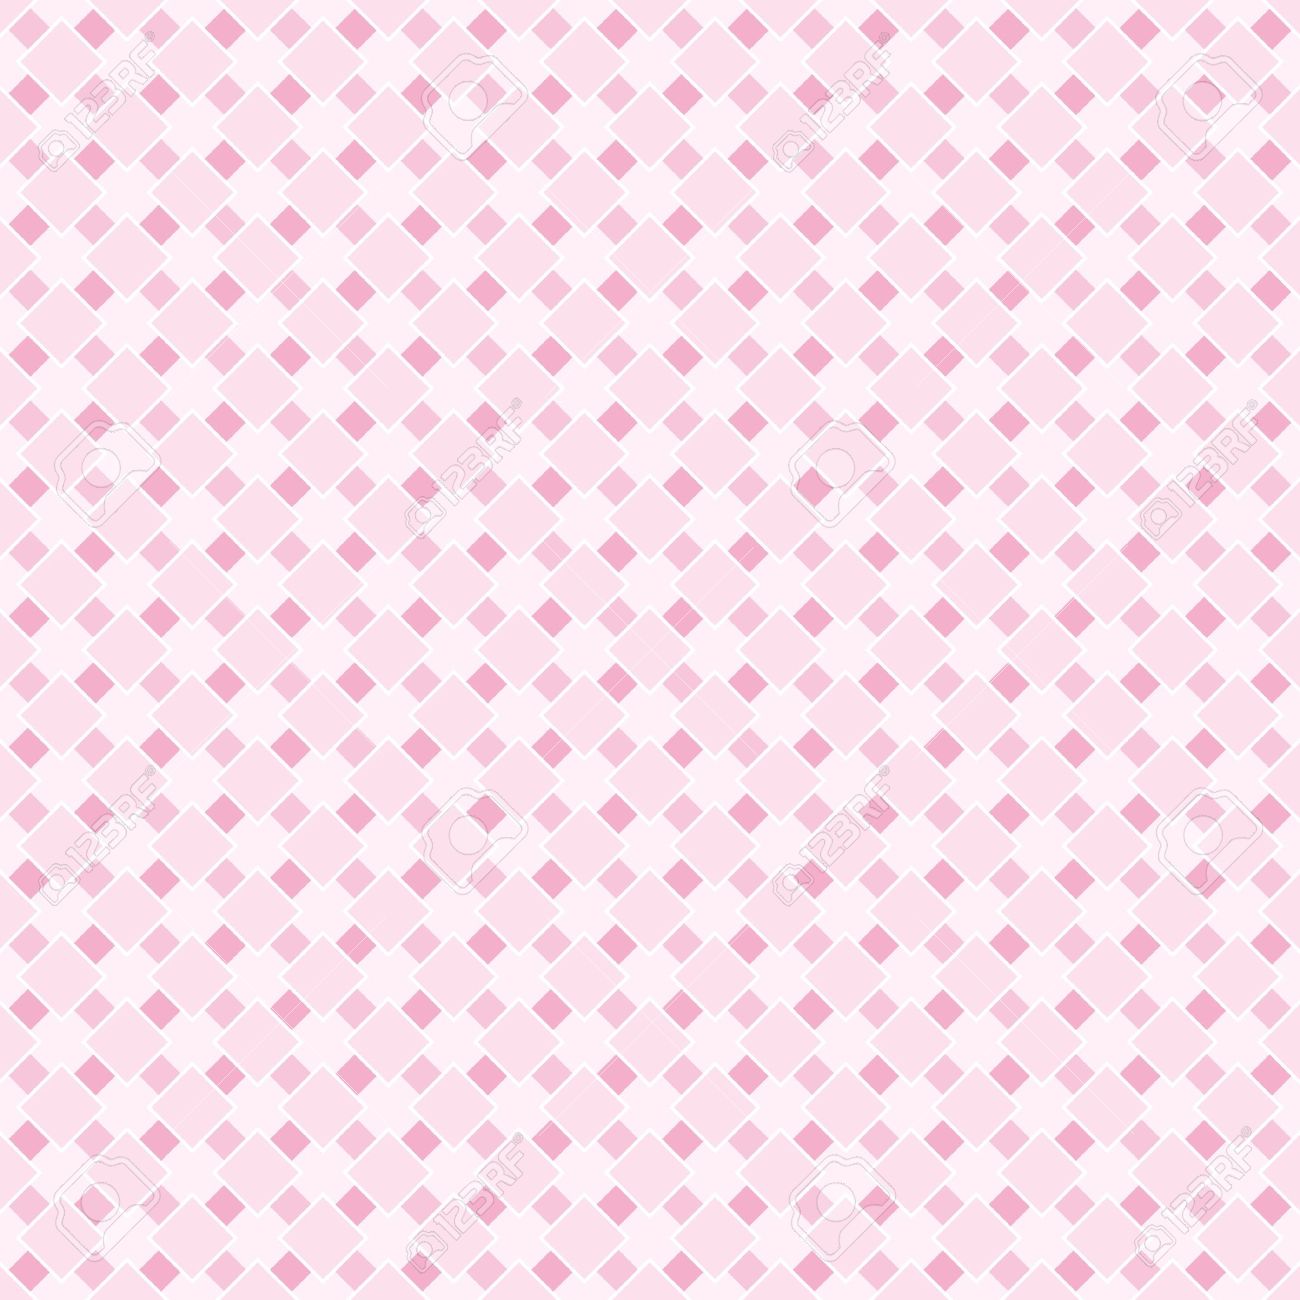 13264538-Vector-sweet-pink-and-white-retro-background-for-website ...